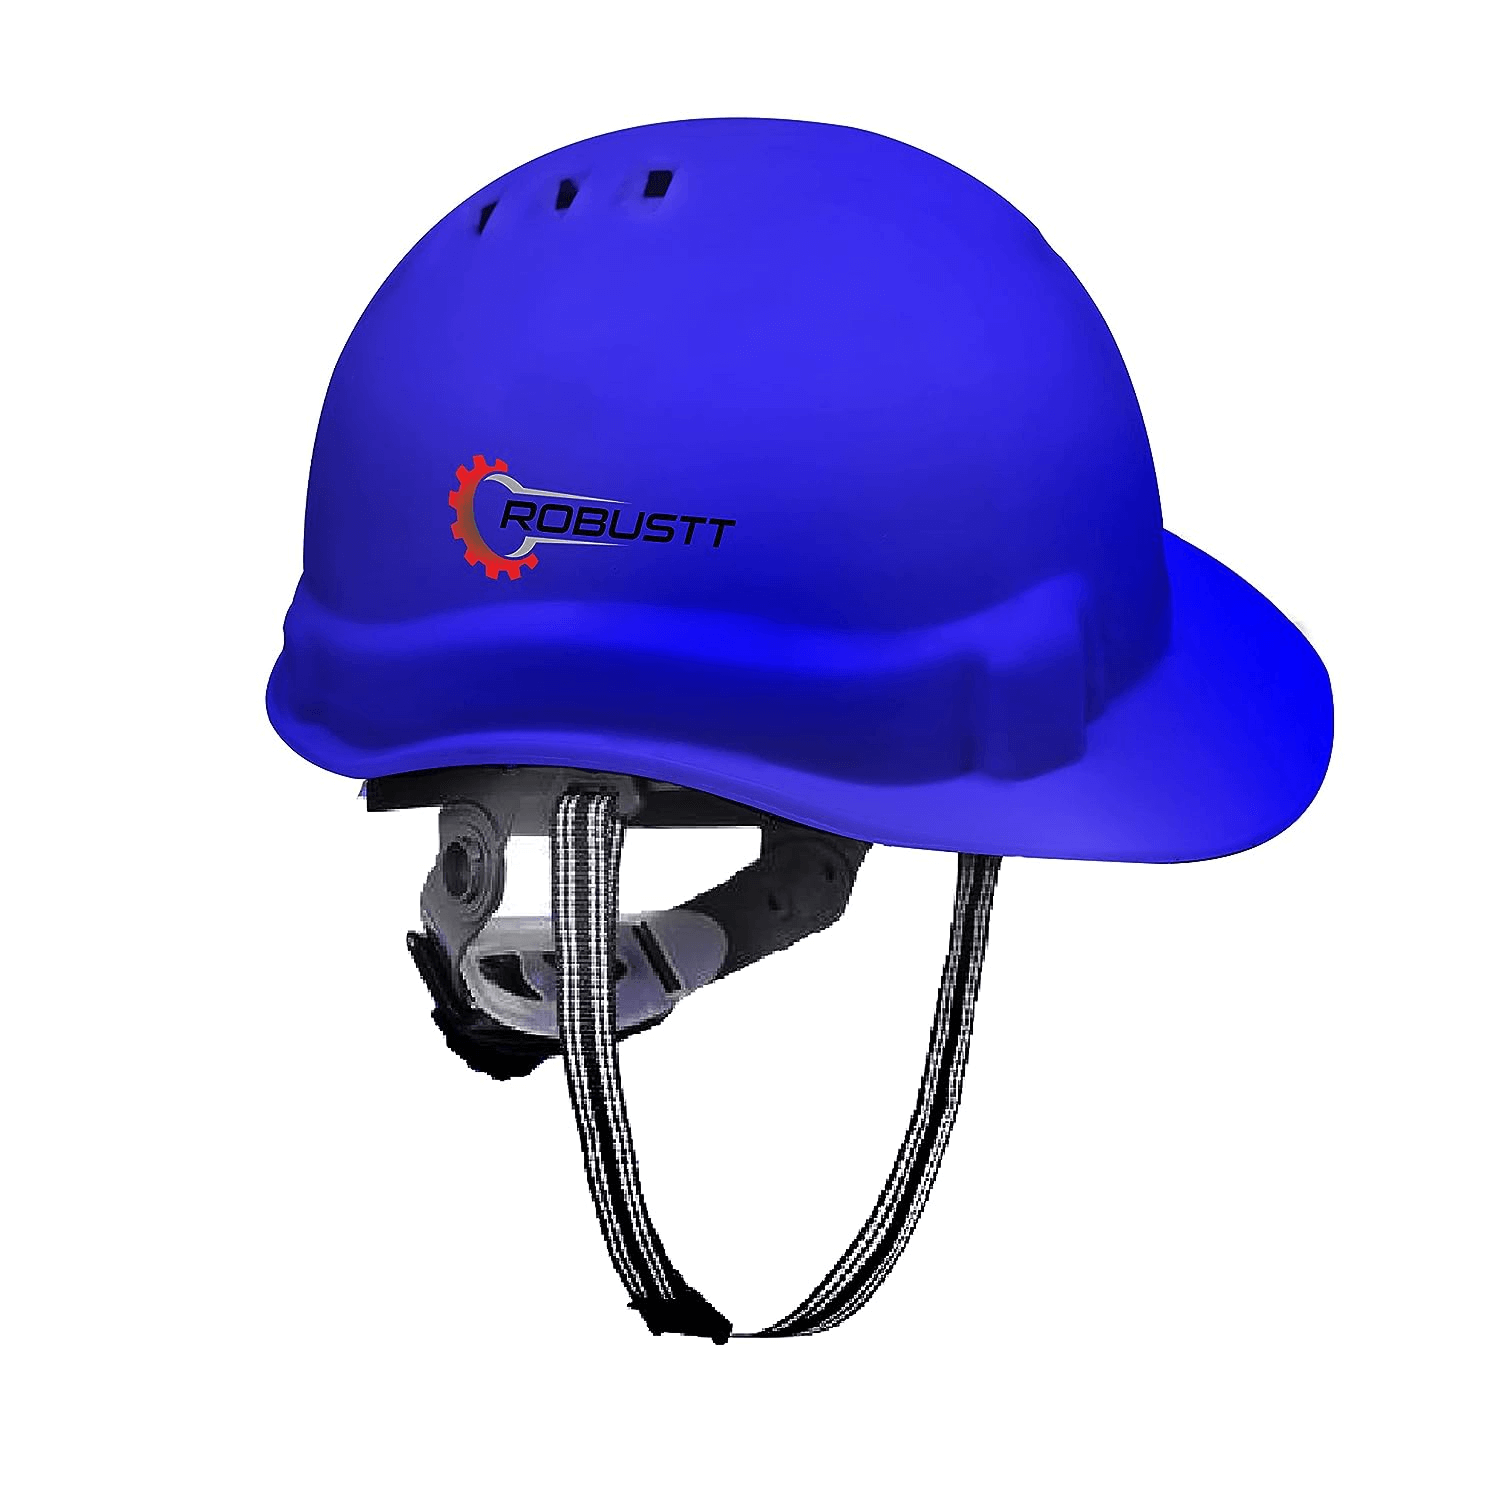 robustt-x-shree-jee-safety-helmet-executive-ratchet-type-adjustment-protection-for-outdoor-work-head-safety-hat-with-sweat-band-blue-pack-of-1